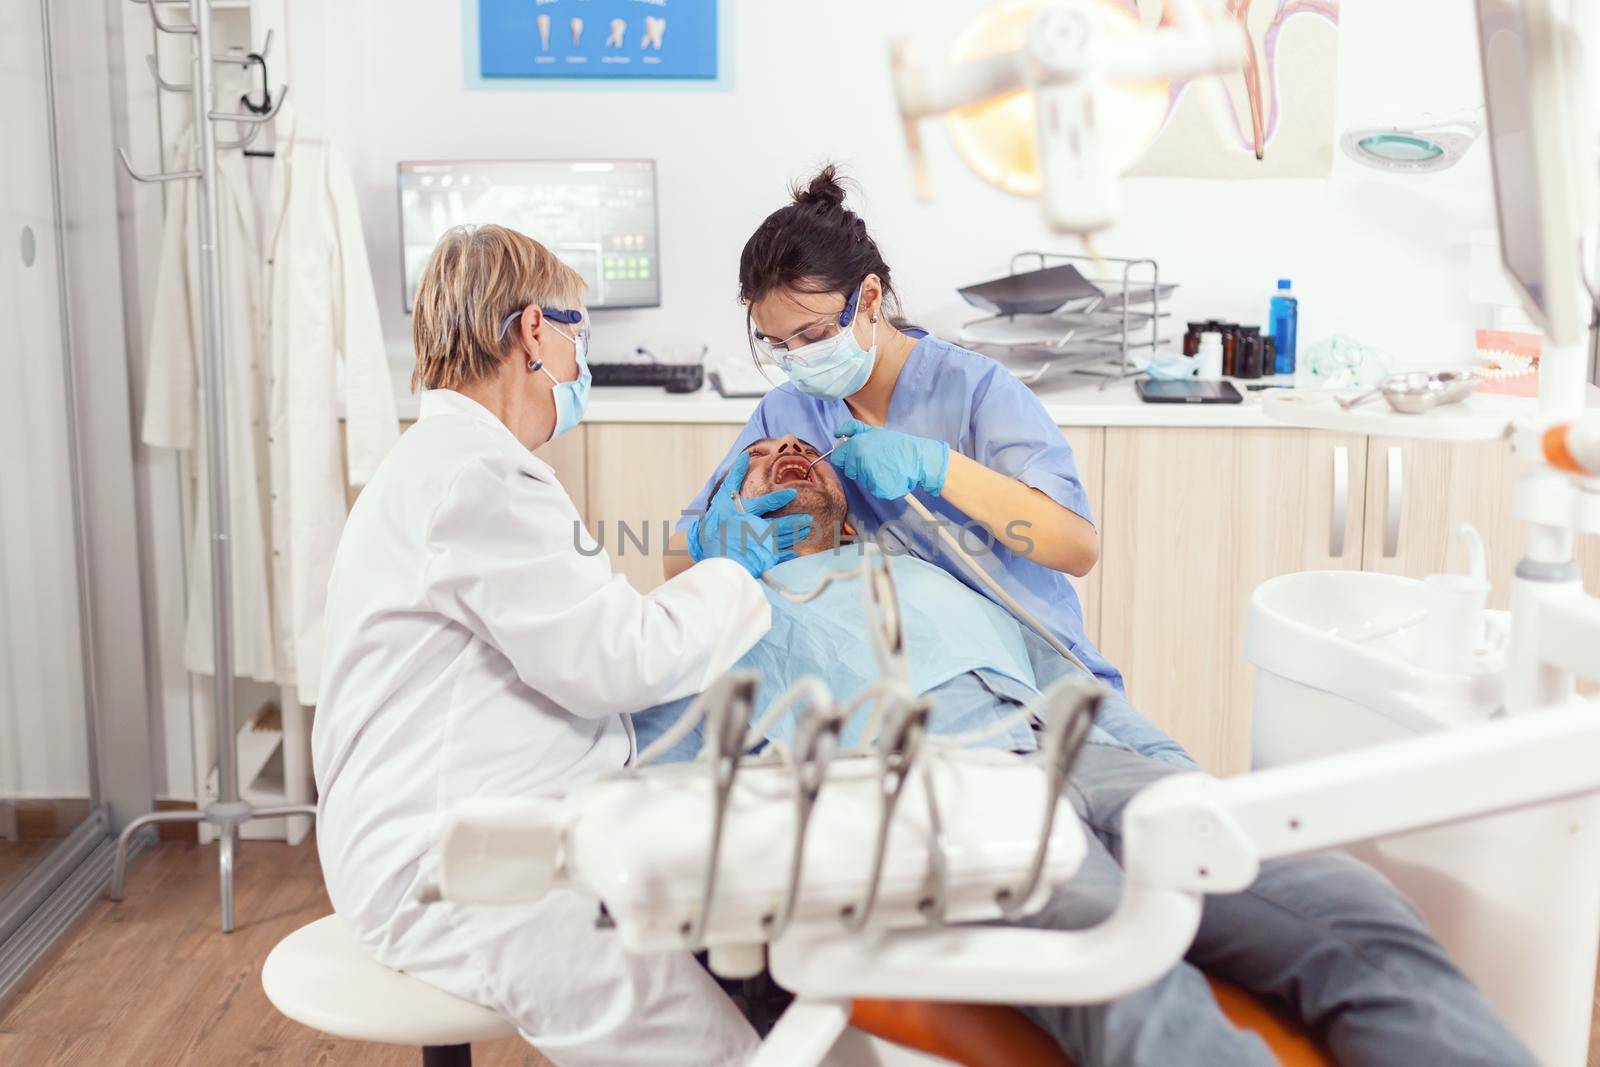 Sick patient sitting on stomatology chair while medical nurse looking into mouth analyzing teeth health during stomatology examination. Senior dentist woman waiting for stomatological procedure